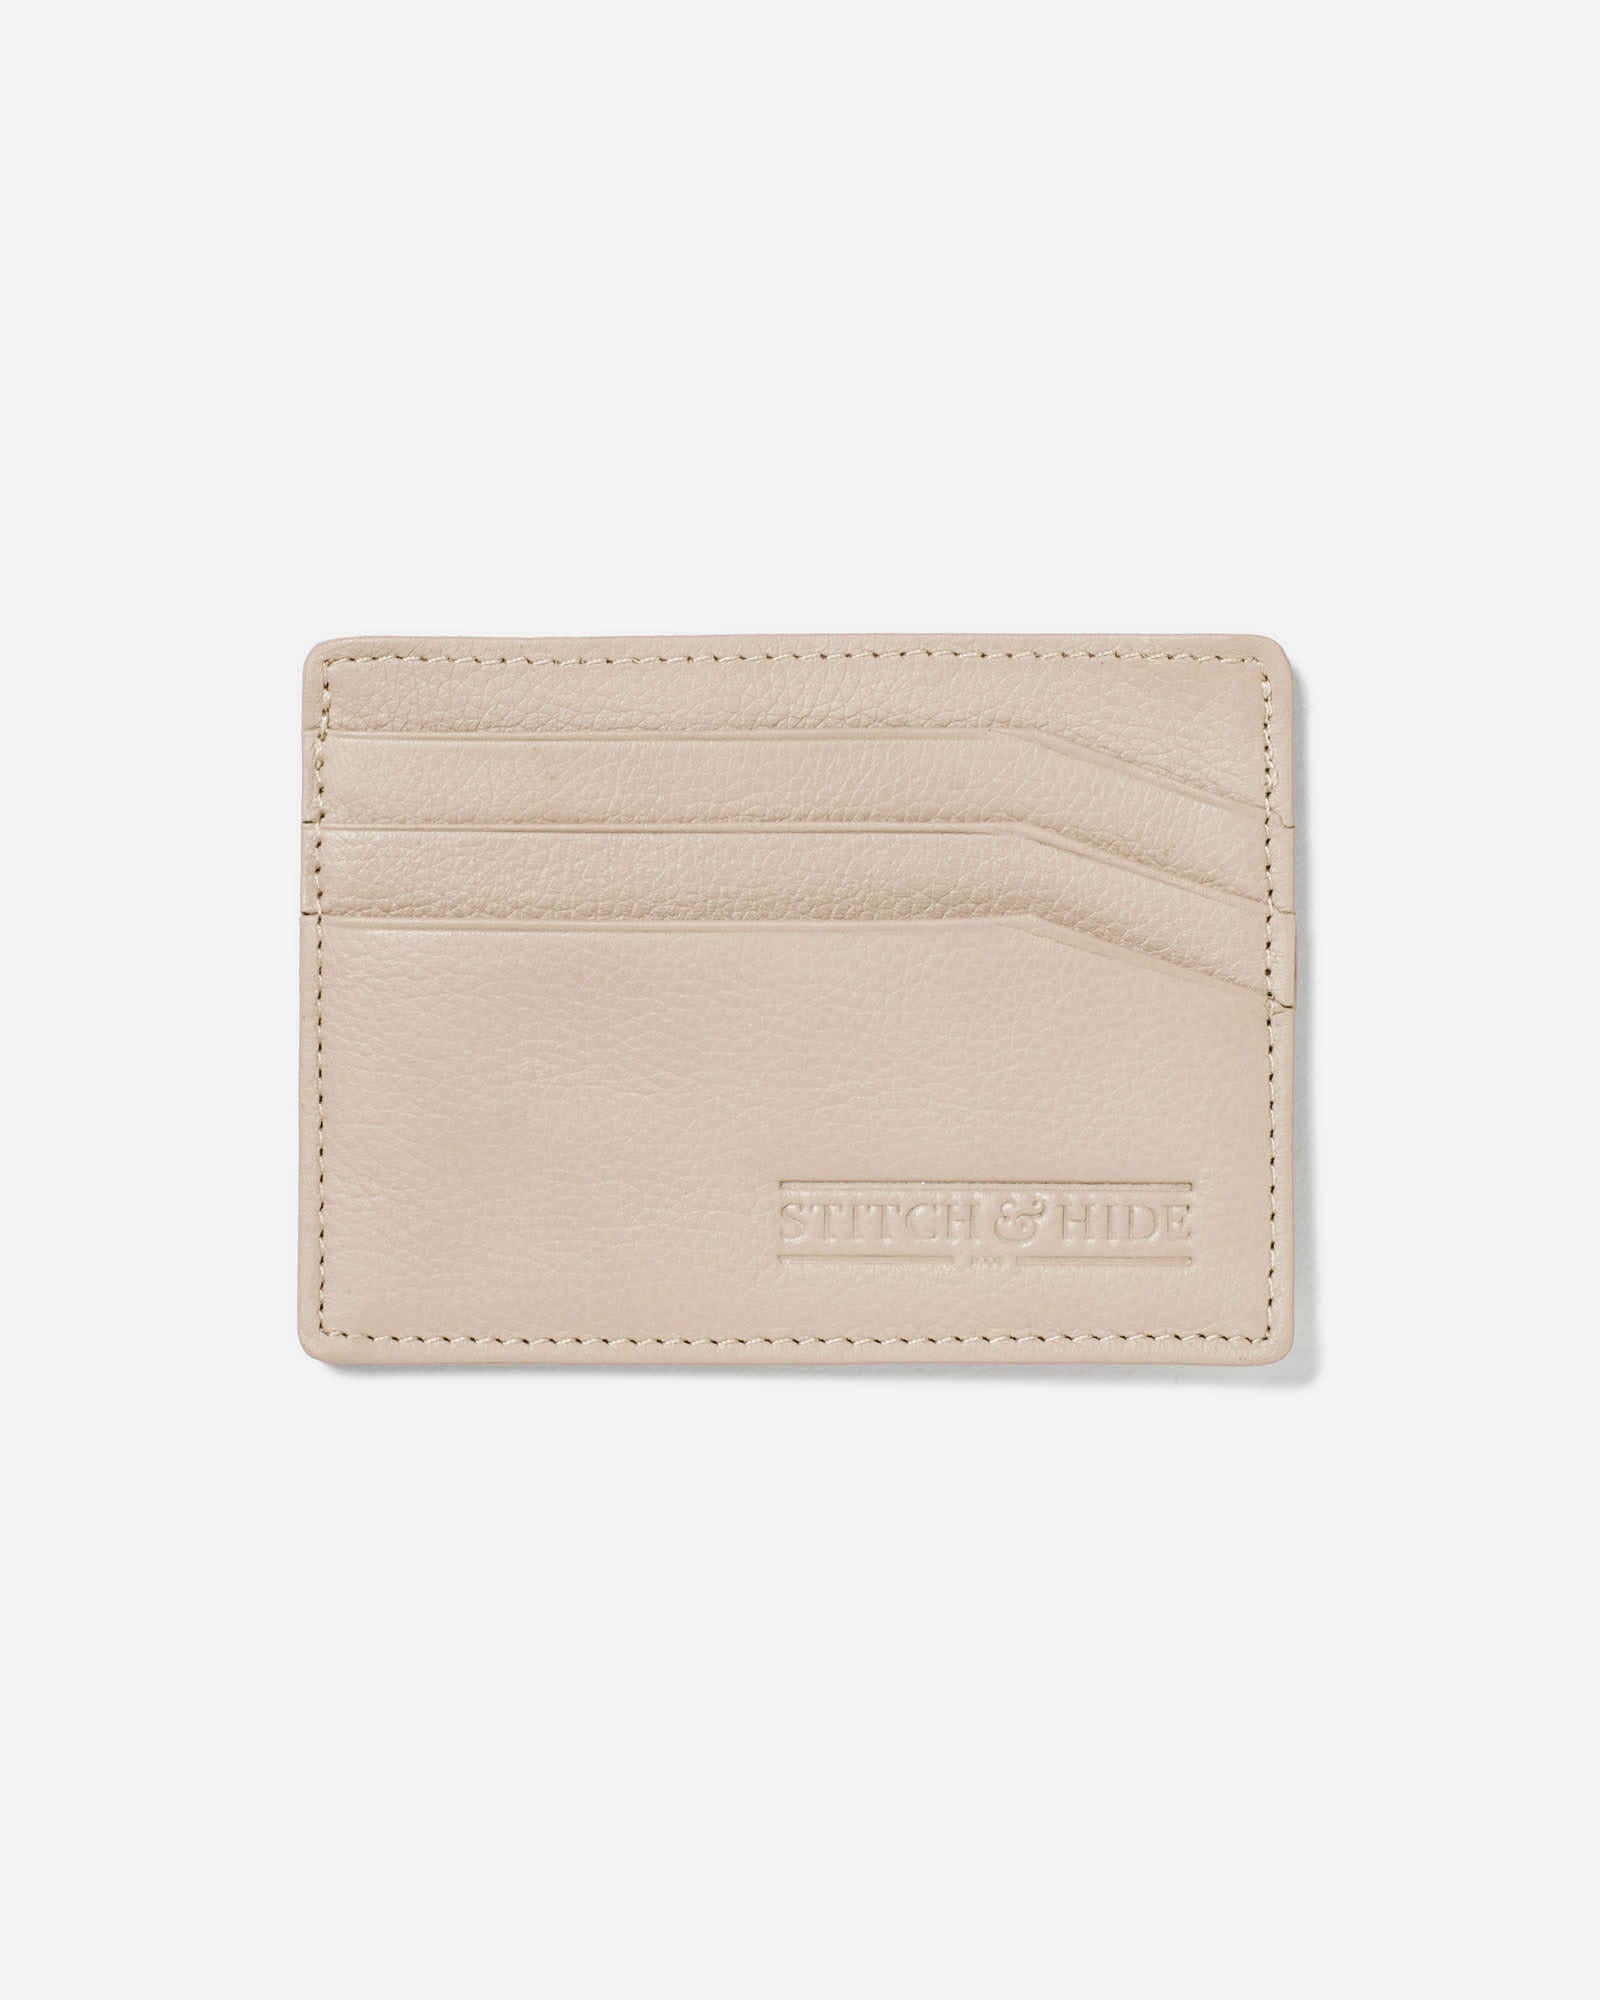 Alice Cardholder - Stitch & Hide Handbags, Wallets & Cases Stitch and Hide Ivory 